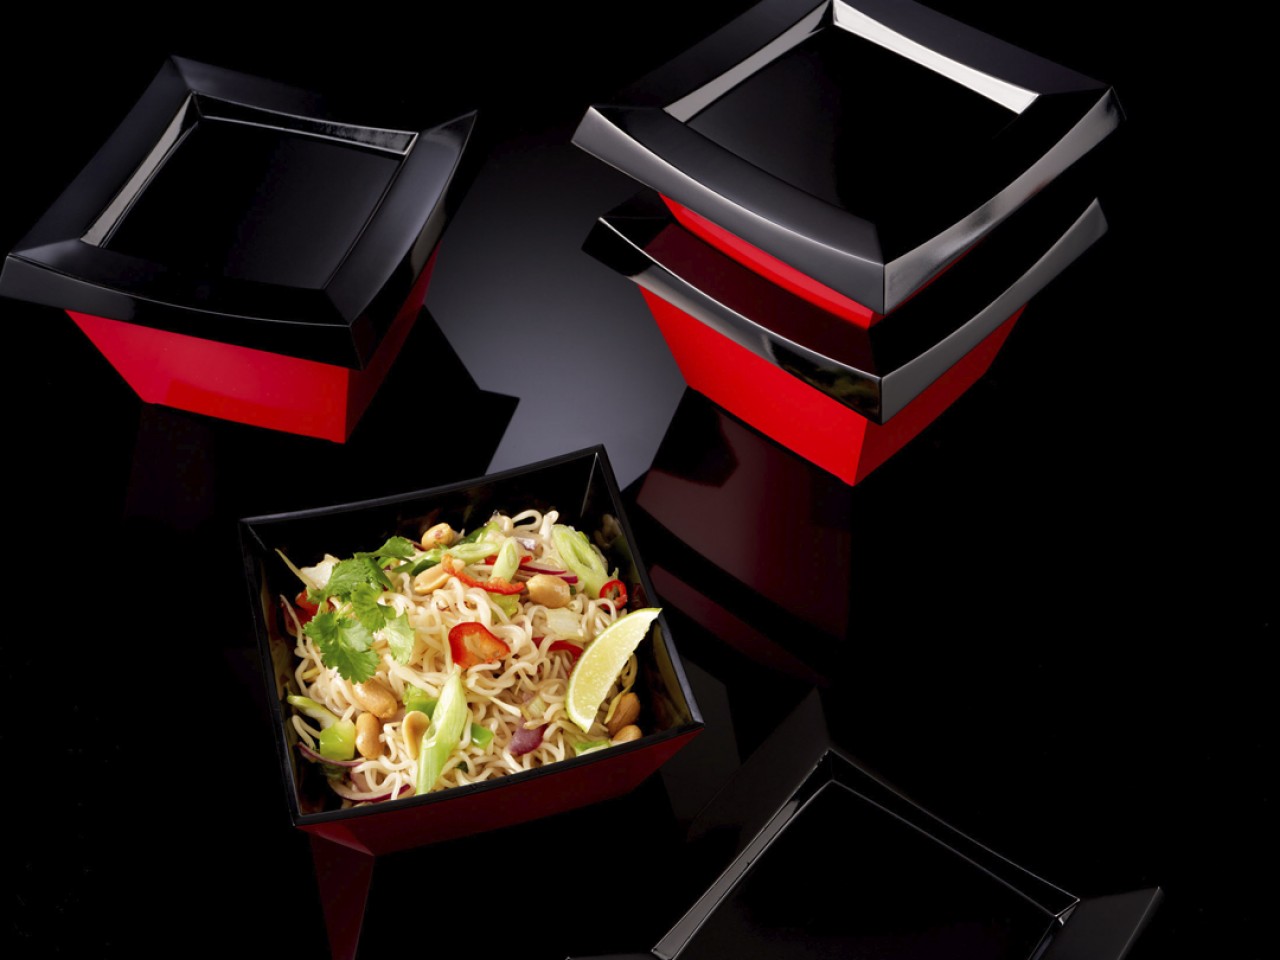 Take Back - Designing a returnable and reusable takeaway packaging innovation concept.